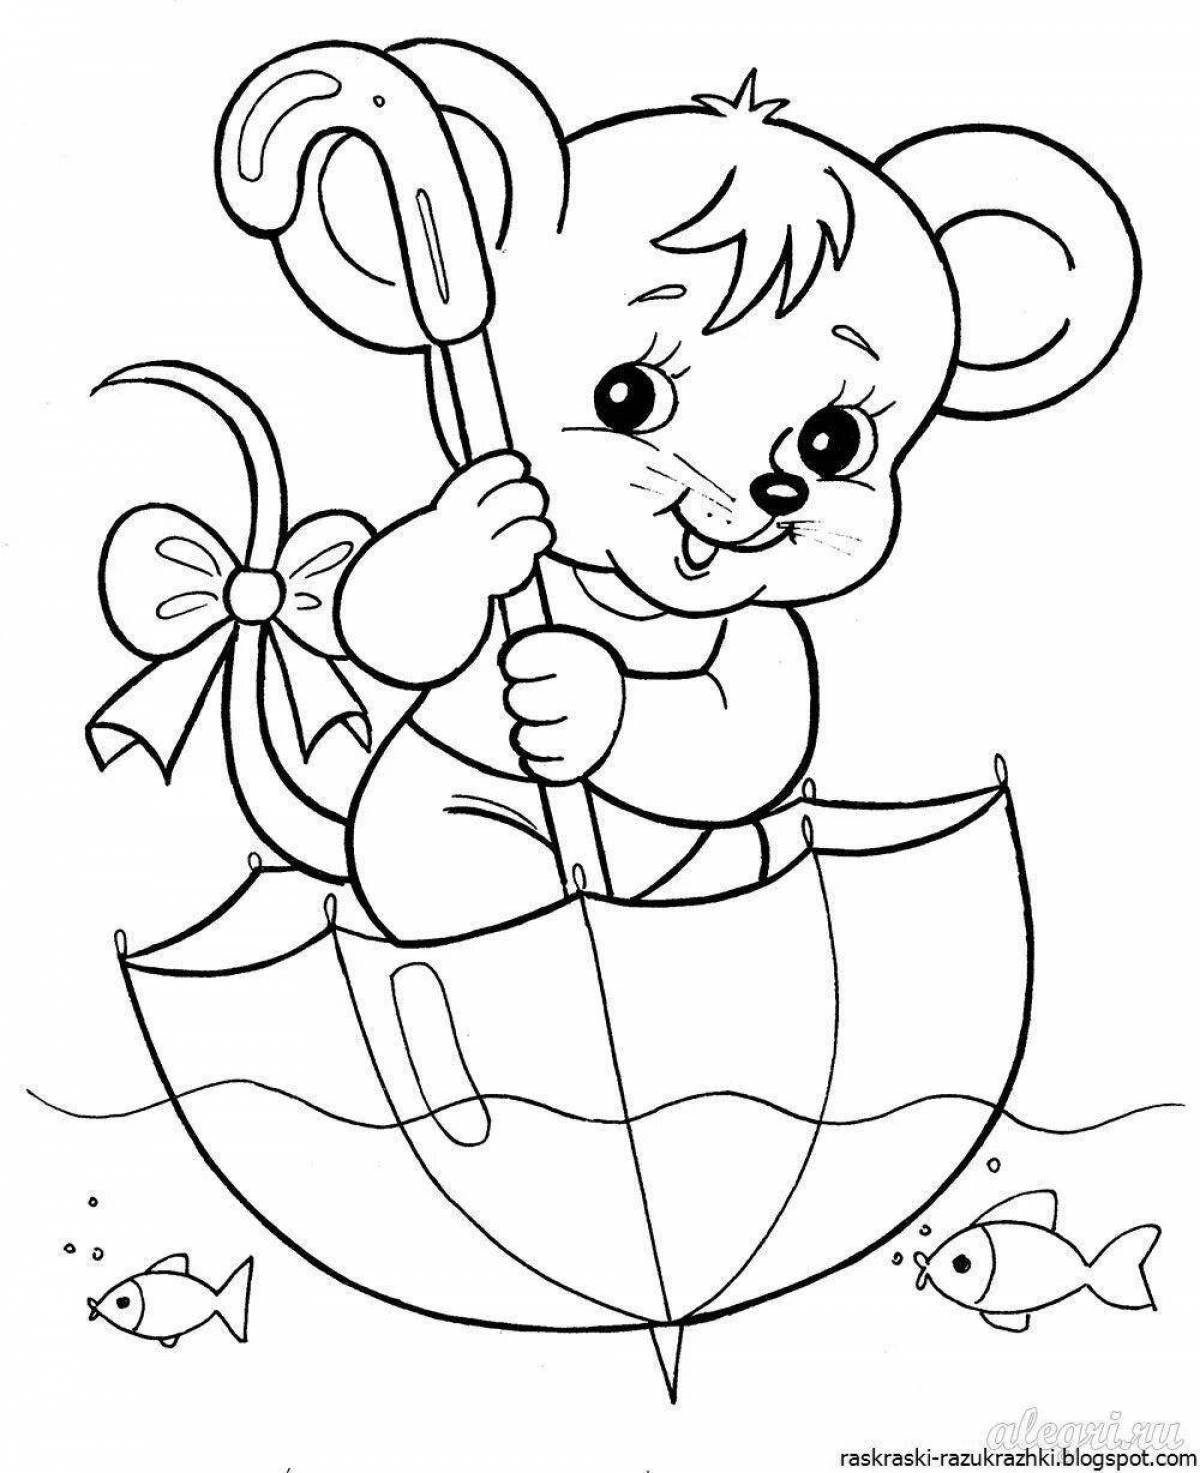 Color-frenzy coloring page for girls 3-4 years old